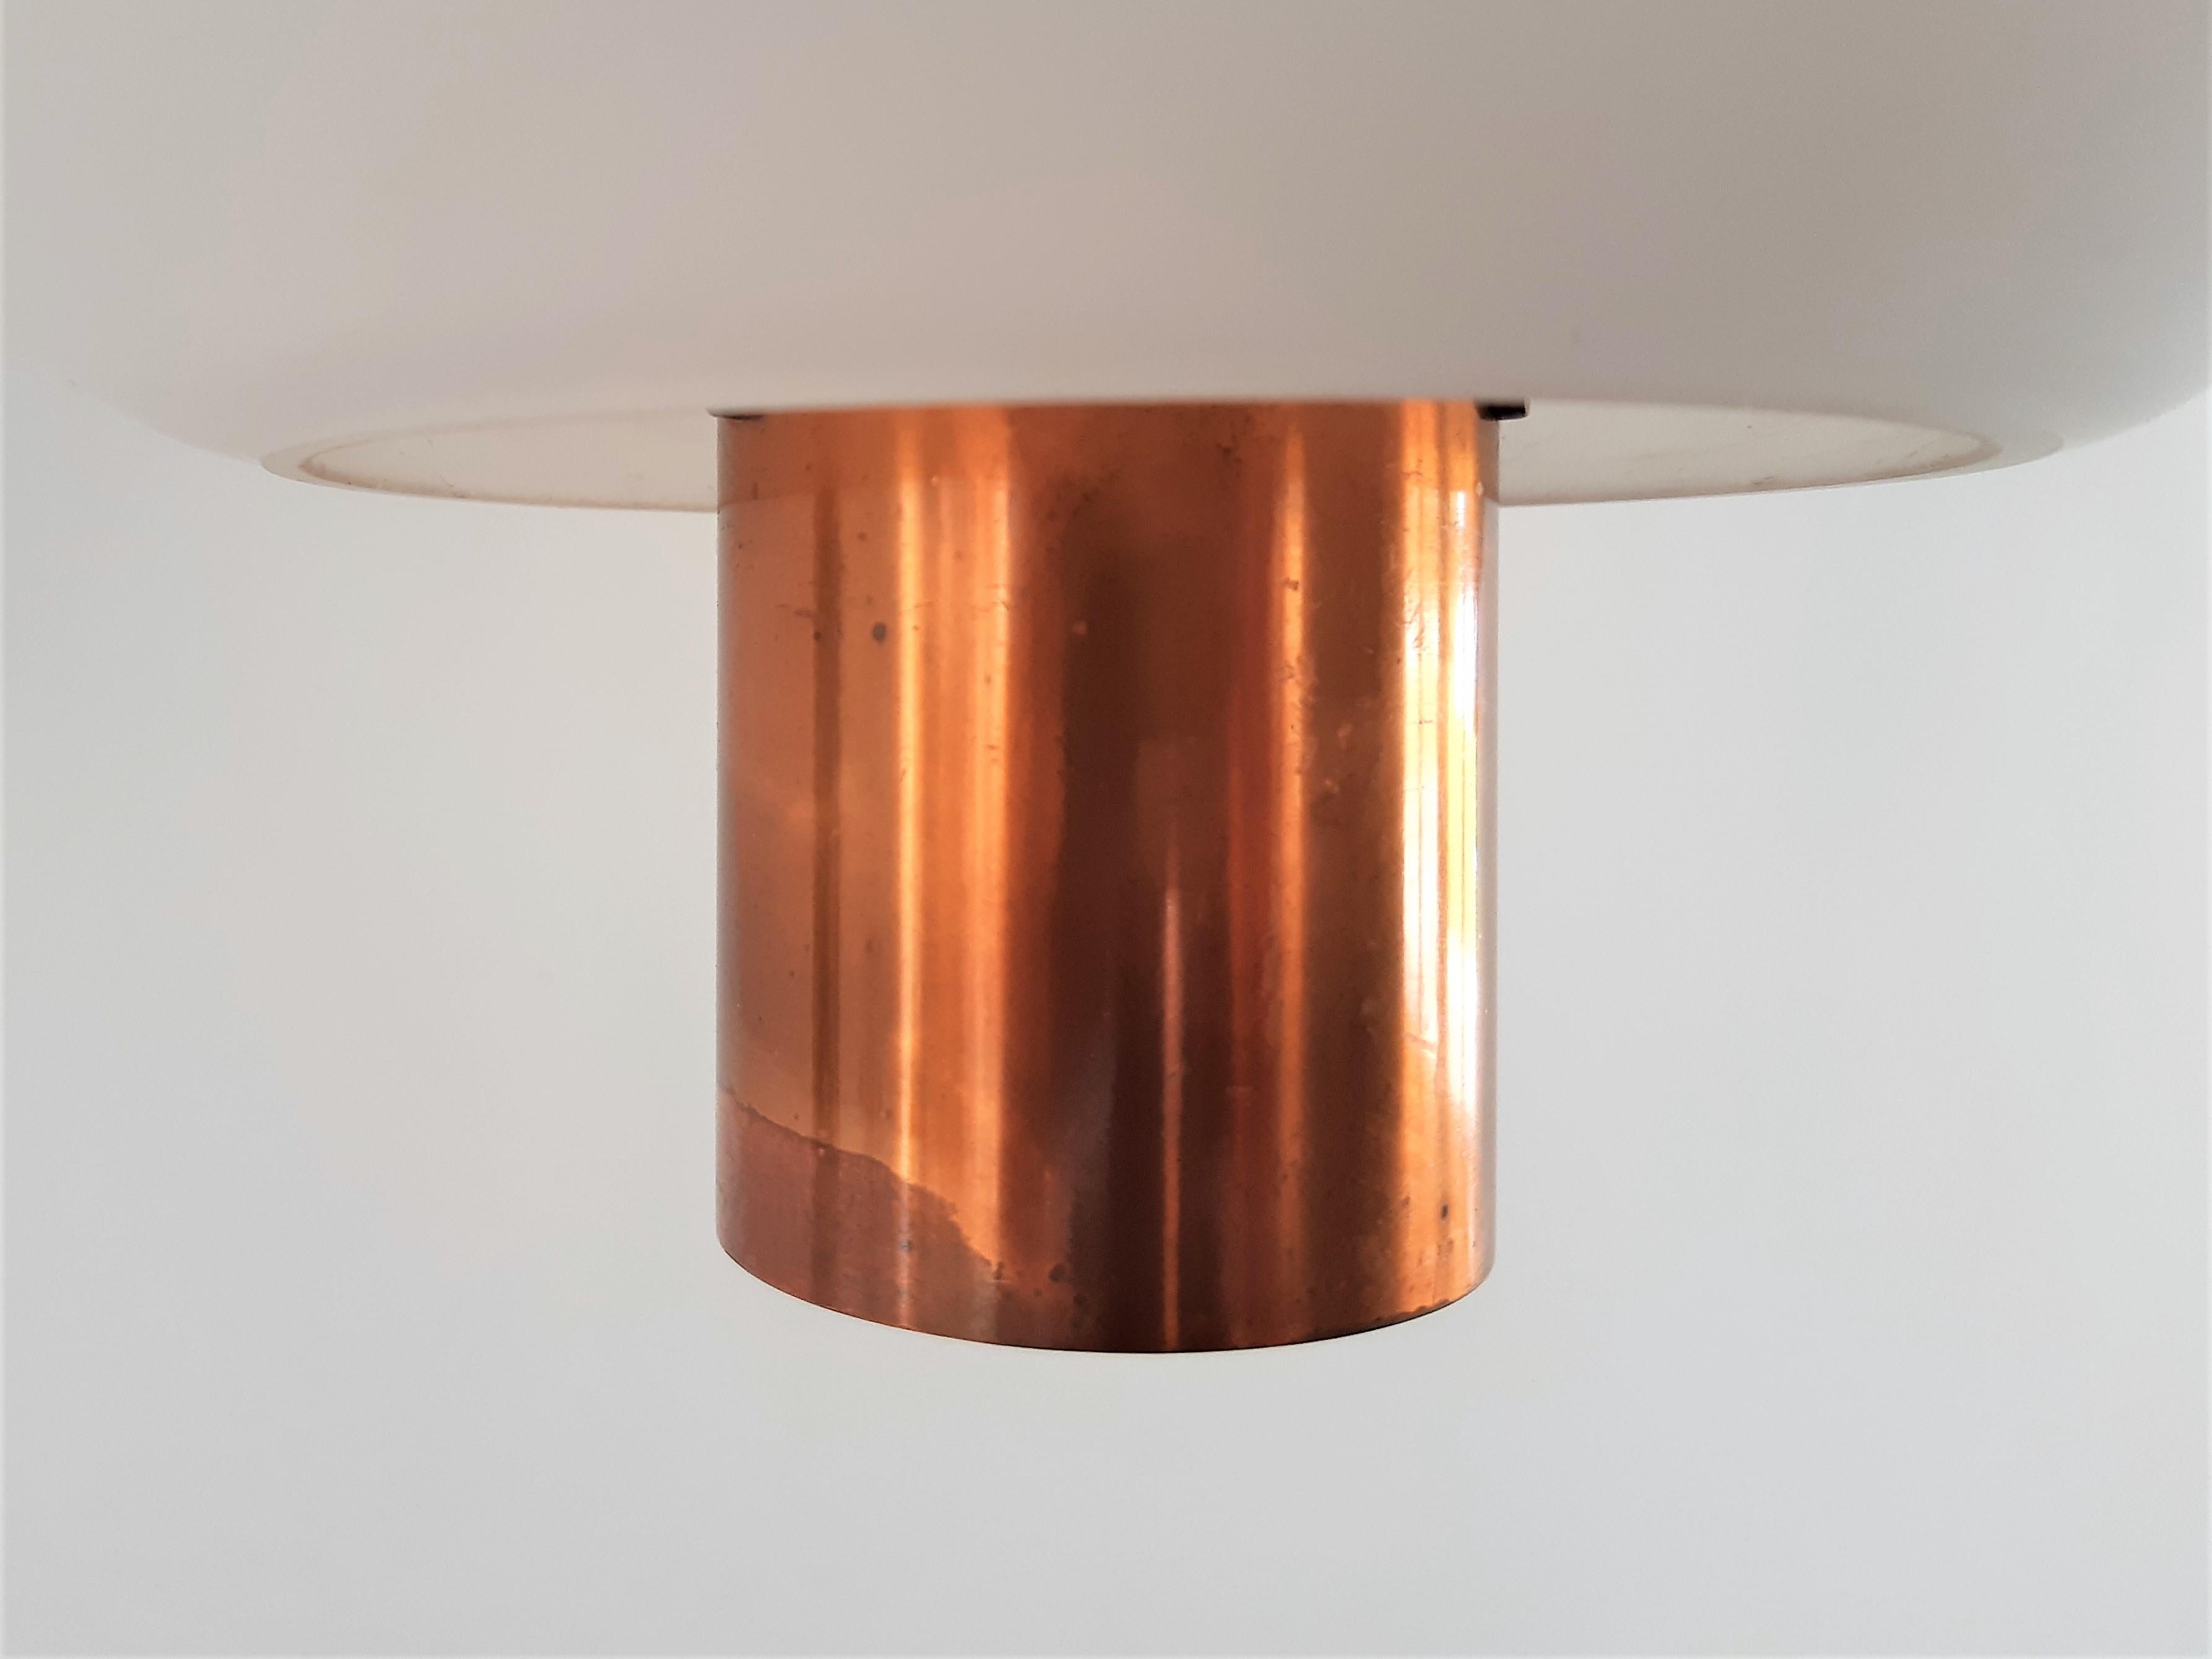 Mid-20th Century Set of 2 Copper and Glass Pendant Lamps for Hiemsrta Evolux, 1960's For Sale